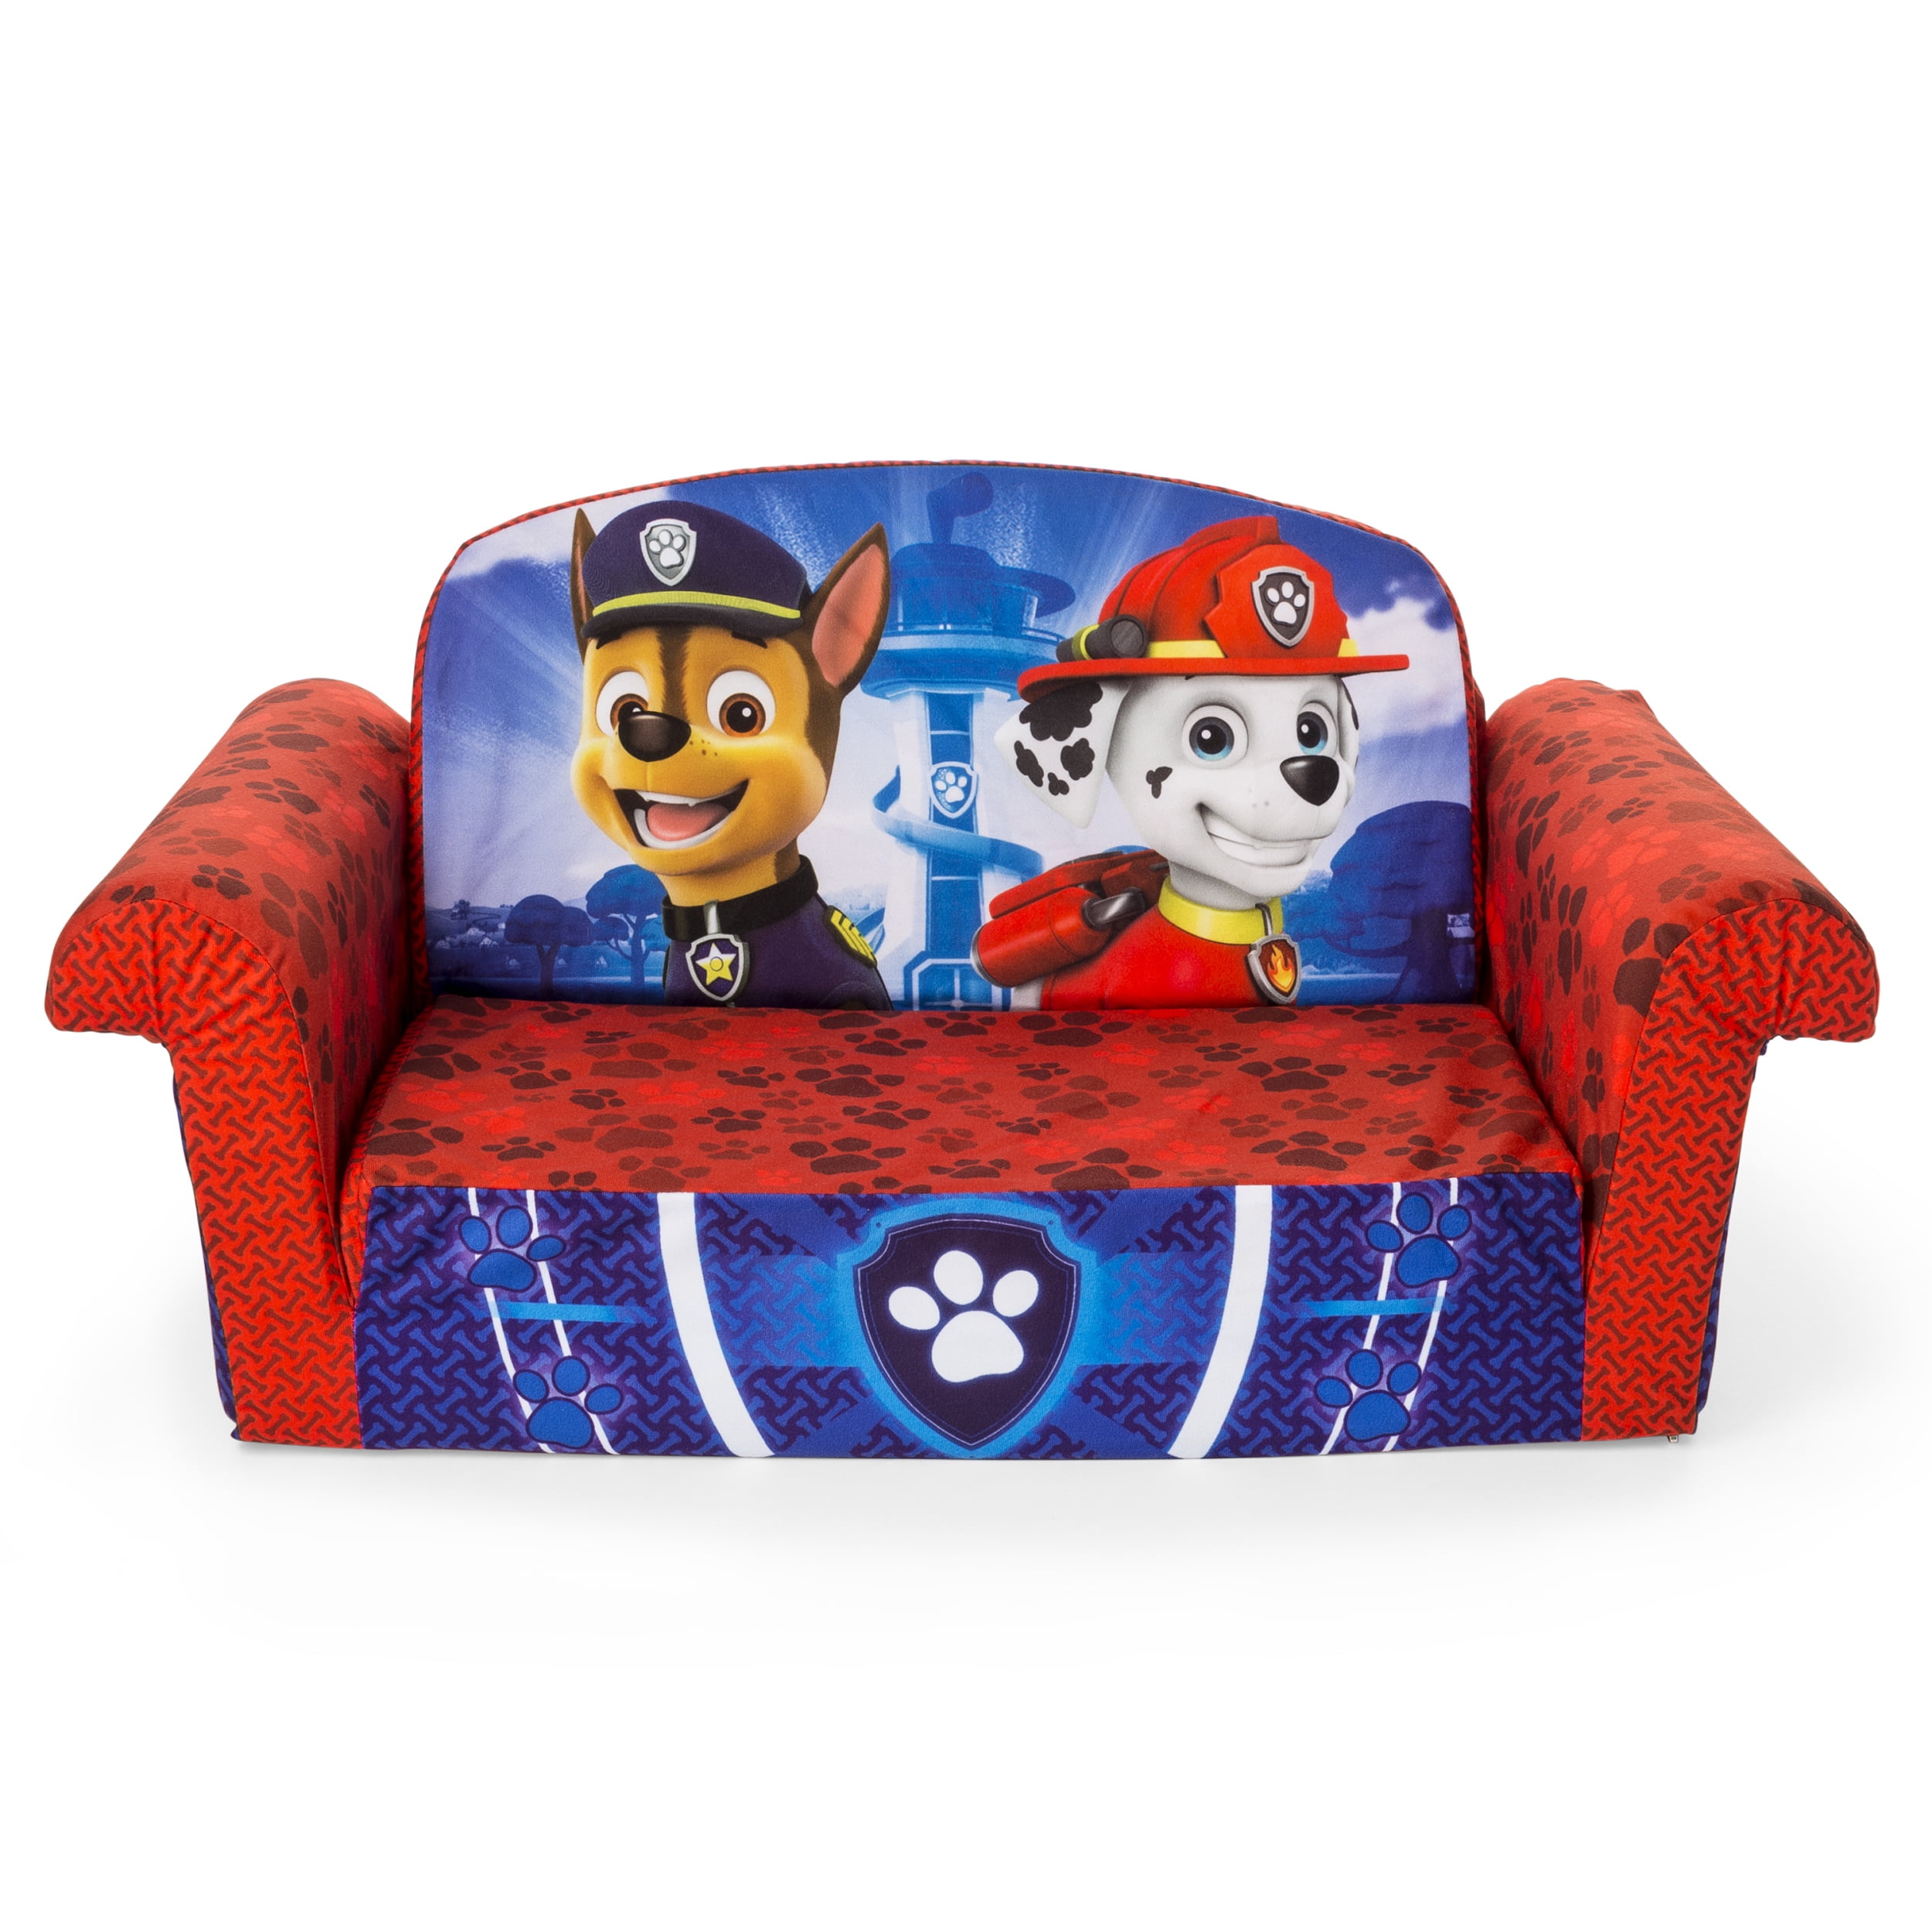 Disney Mickey Mouse Roadsters Flip Open Kids Sofa Children Couch Christmas Gift 